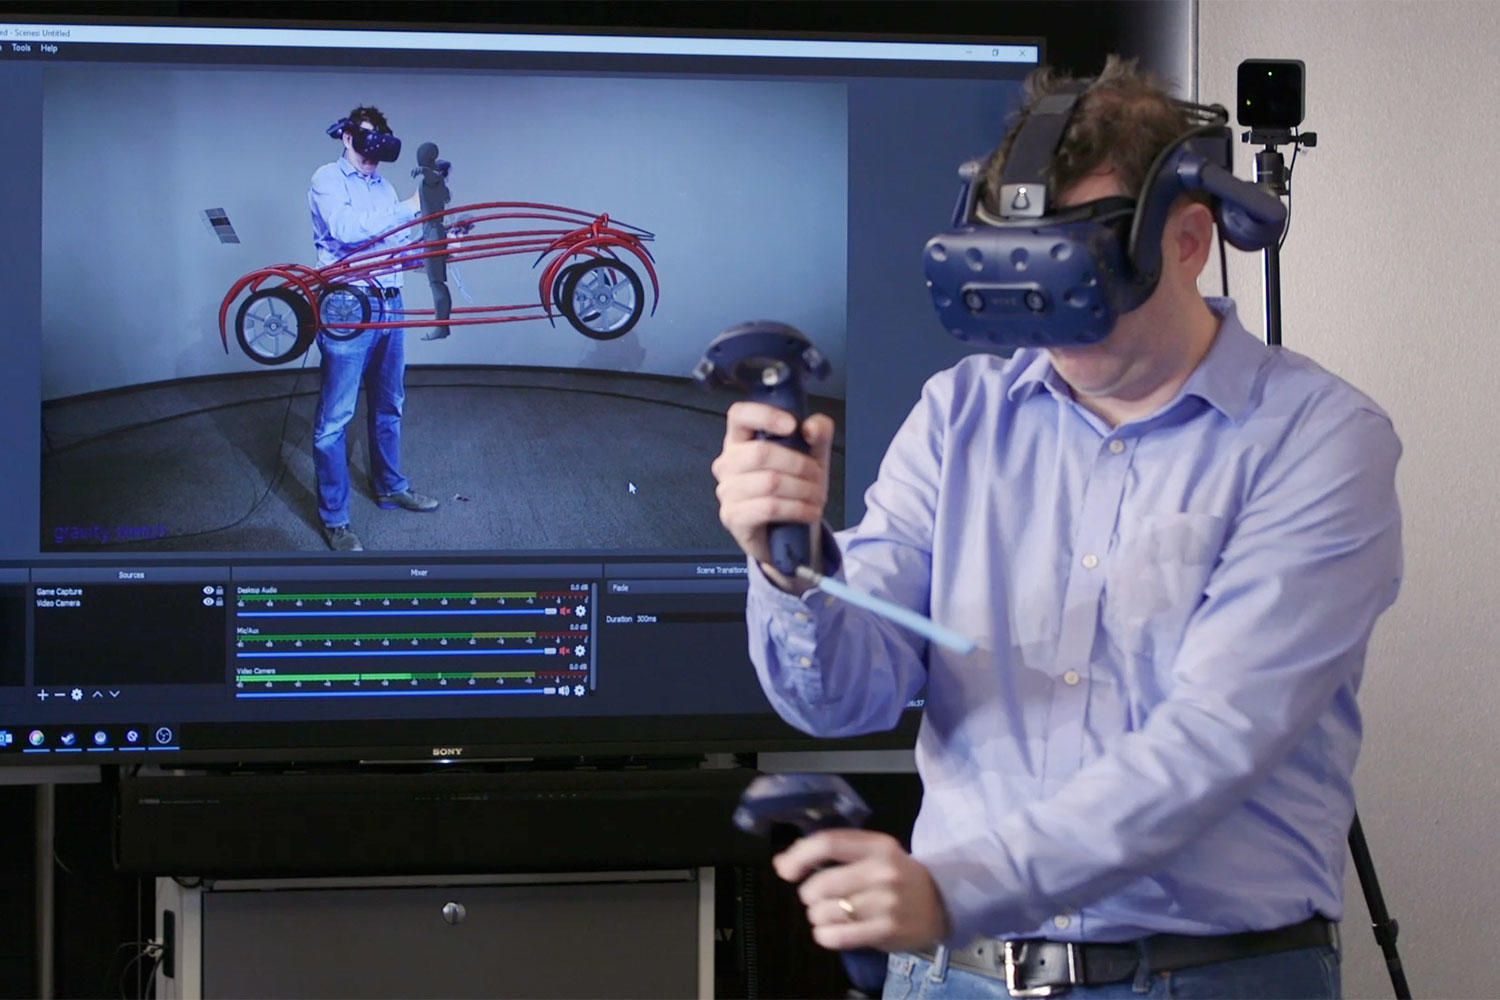 Ford designers around the world can now collaborate in virtual reality design